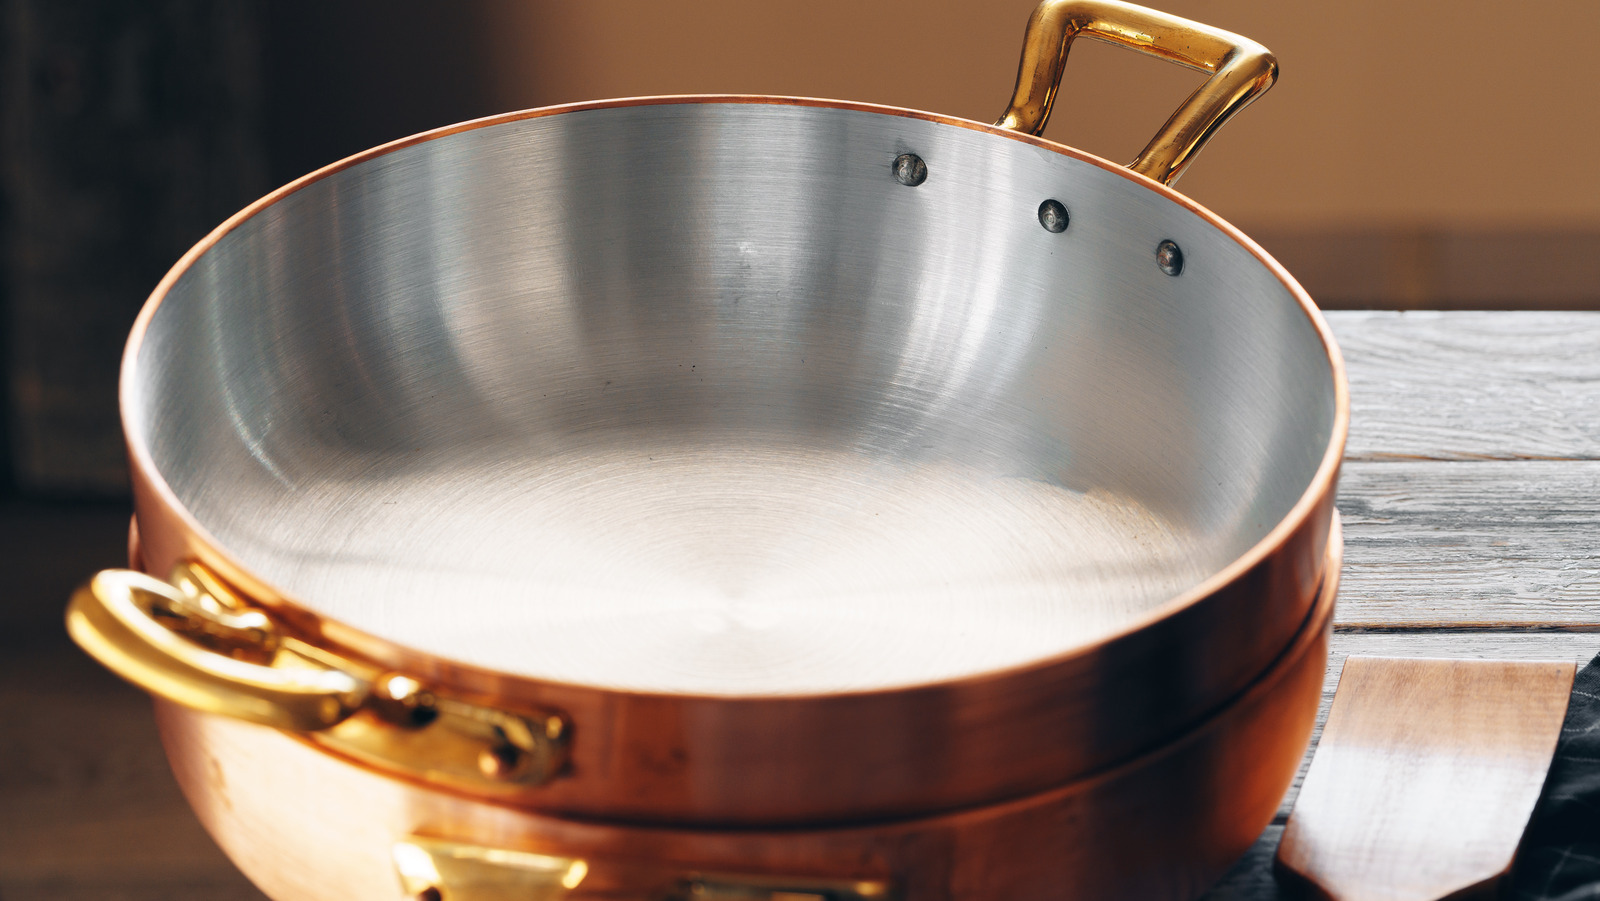 Why must copper pans be lined with a tin coating on the interior?